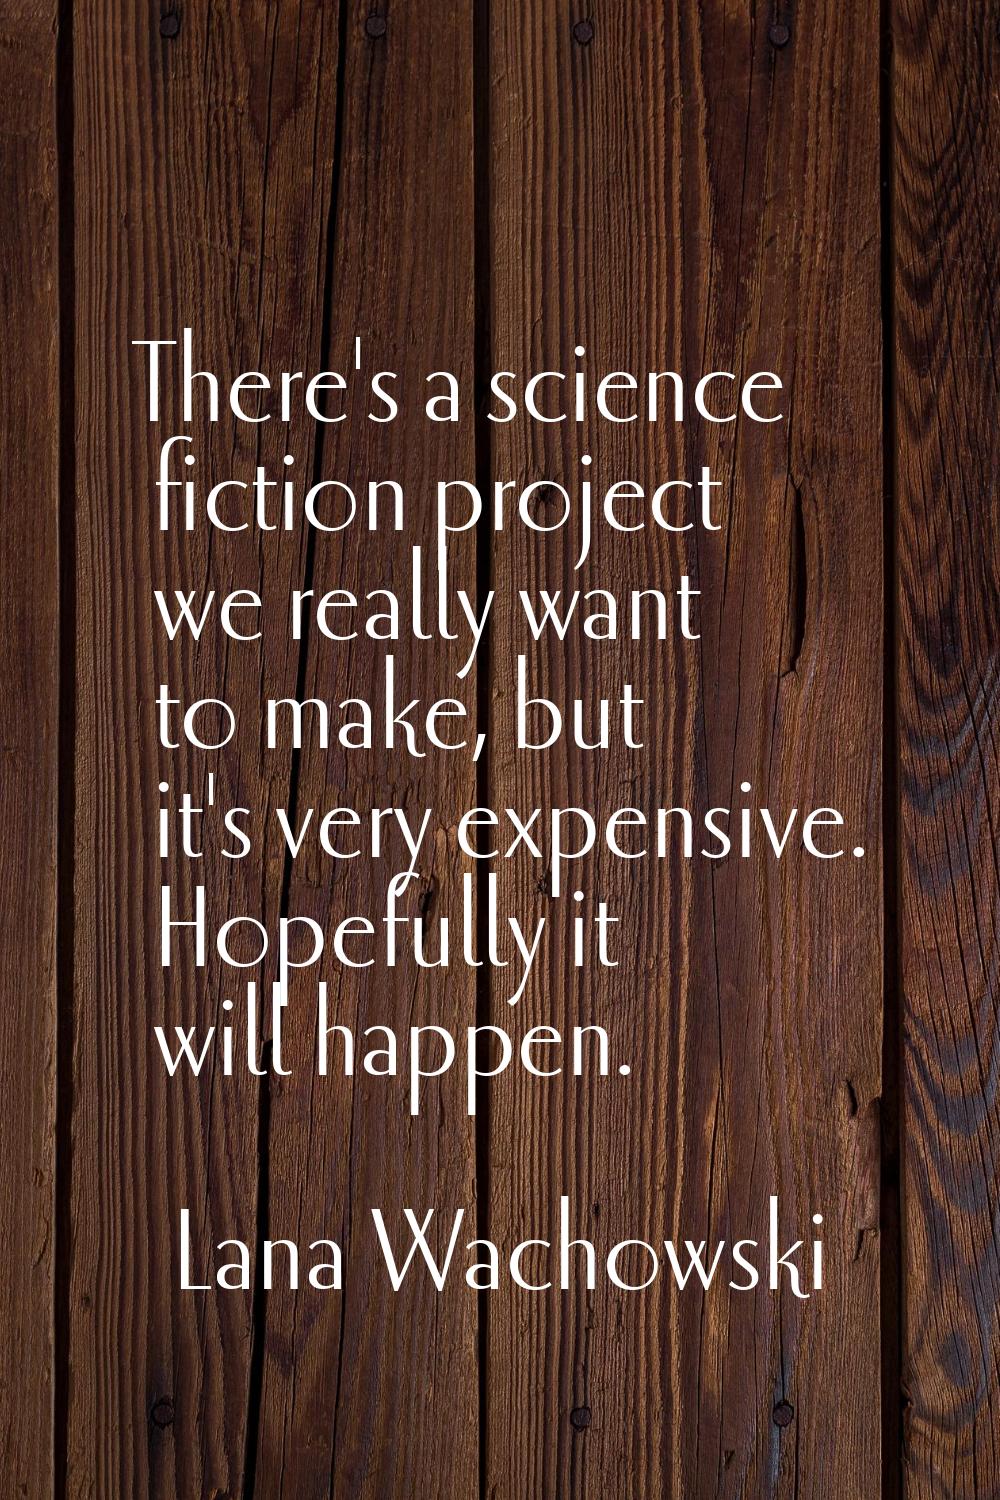 There's a science fiction project we really want to make, but it's very expensive. Hopefully it wil